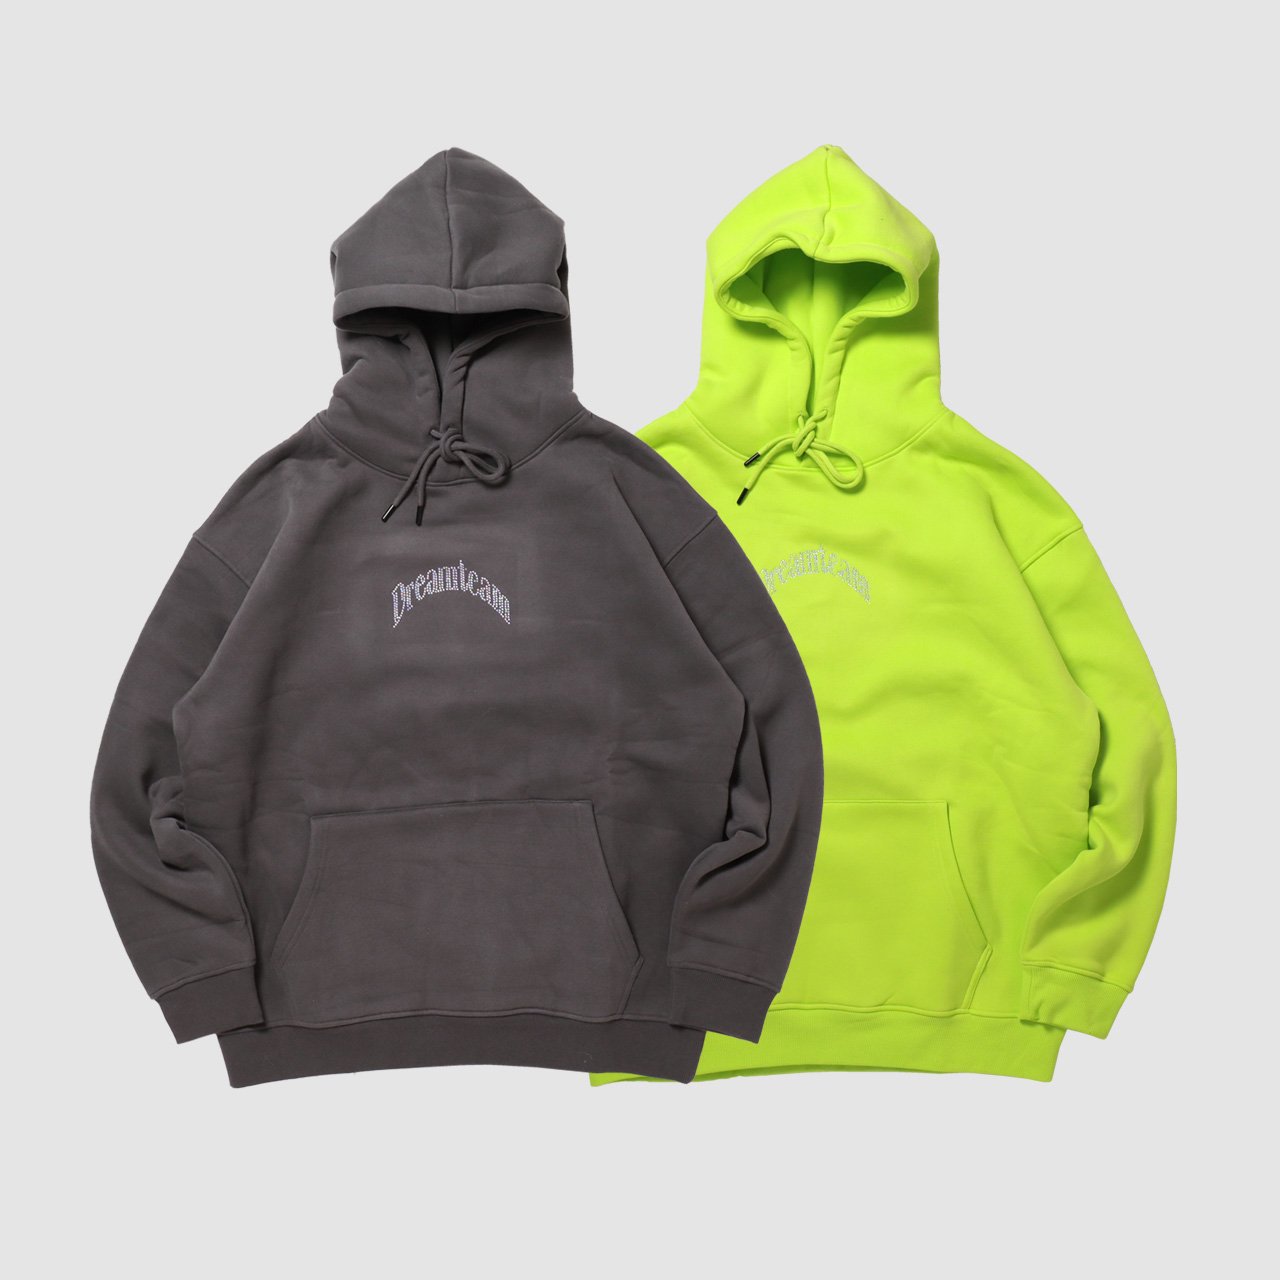 <img class='new_mark_img1' src='https://img.shop-pro.jp/img/new/icons35.gif' style='border:none;display:inline;margin:0px;padding:0px;width:auto;' />Rhinestone Arch Logo Hooded Pullover